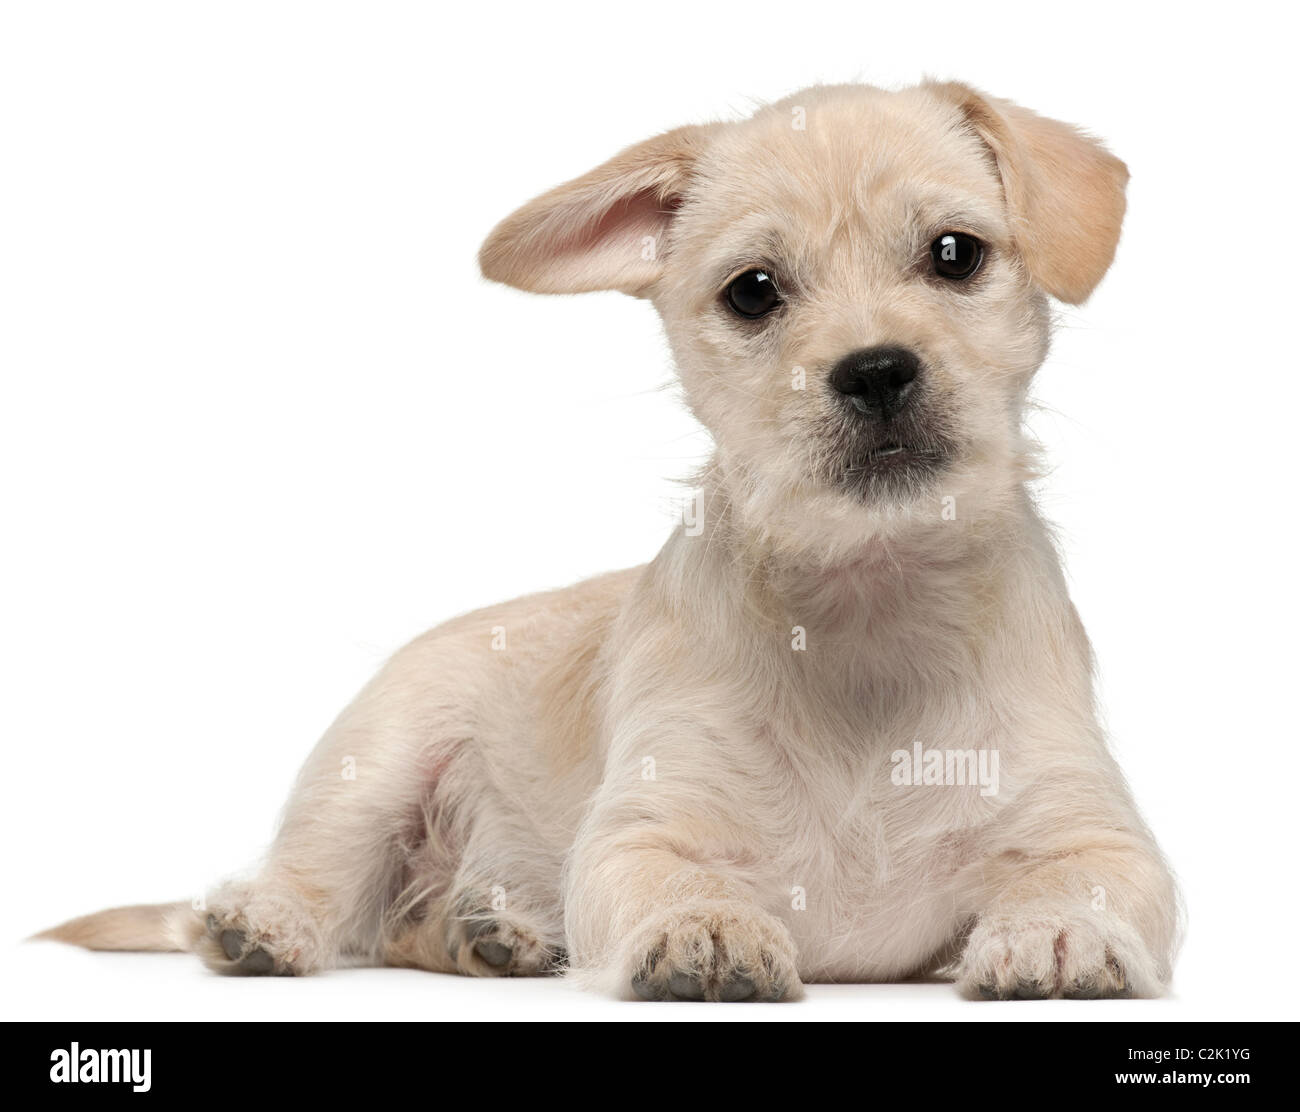 Mixed-breed puppy, 4 months old, lying in front of white background Stock Photo